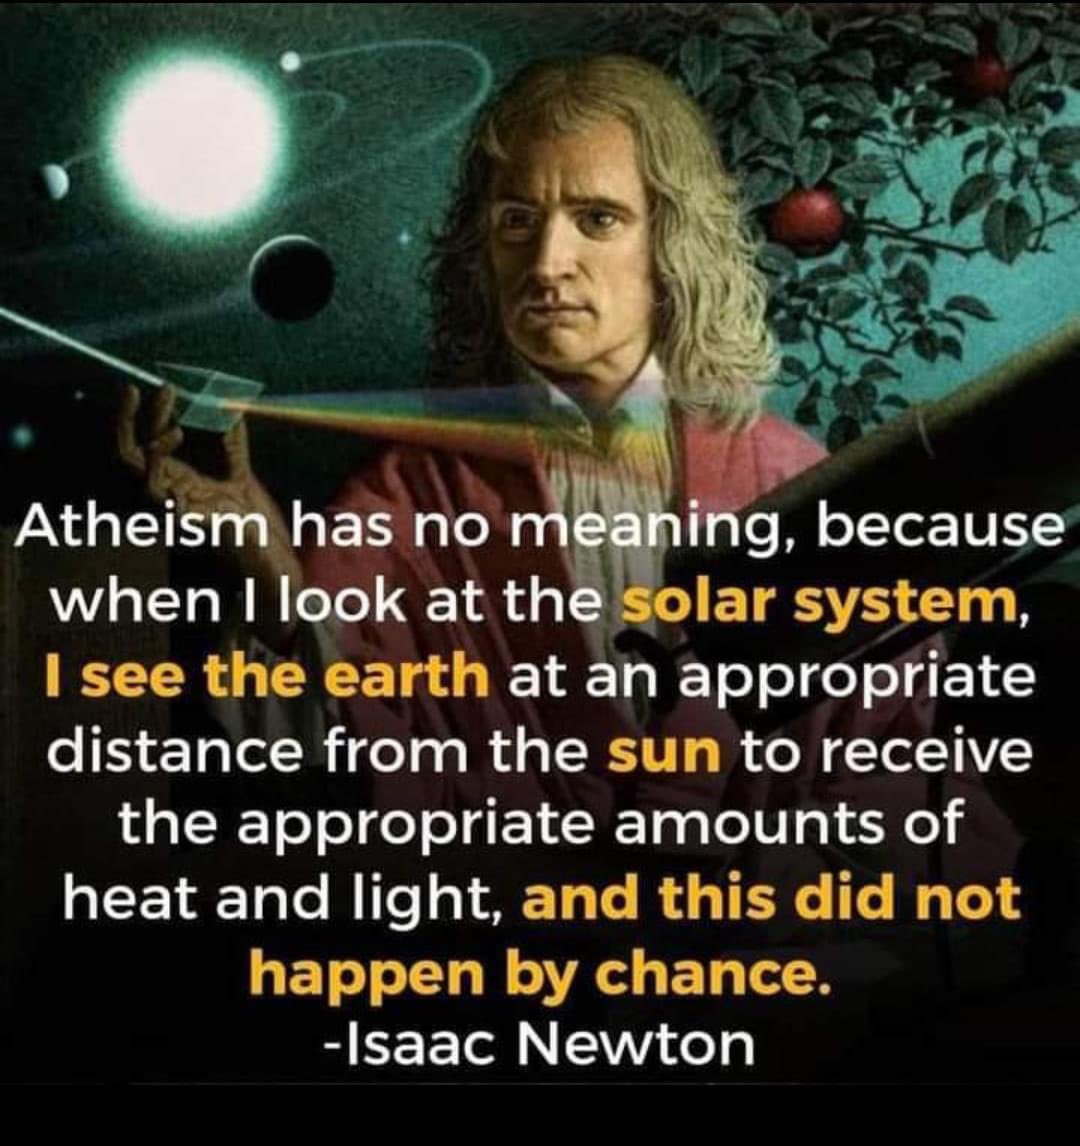 @SandraK87933686 'Maximum atheist' 😂. Even if Earth is a dome and we're at the center of God's creation, #IntelligentDesign and #SacredGeometry are everywhere. To believe complex life occurs from randomness is to be willfully ignorant; one must believe in it. #Atheism is a religion unto itself.